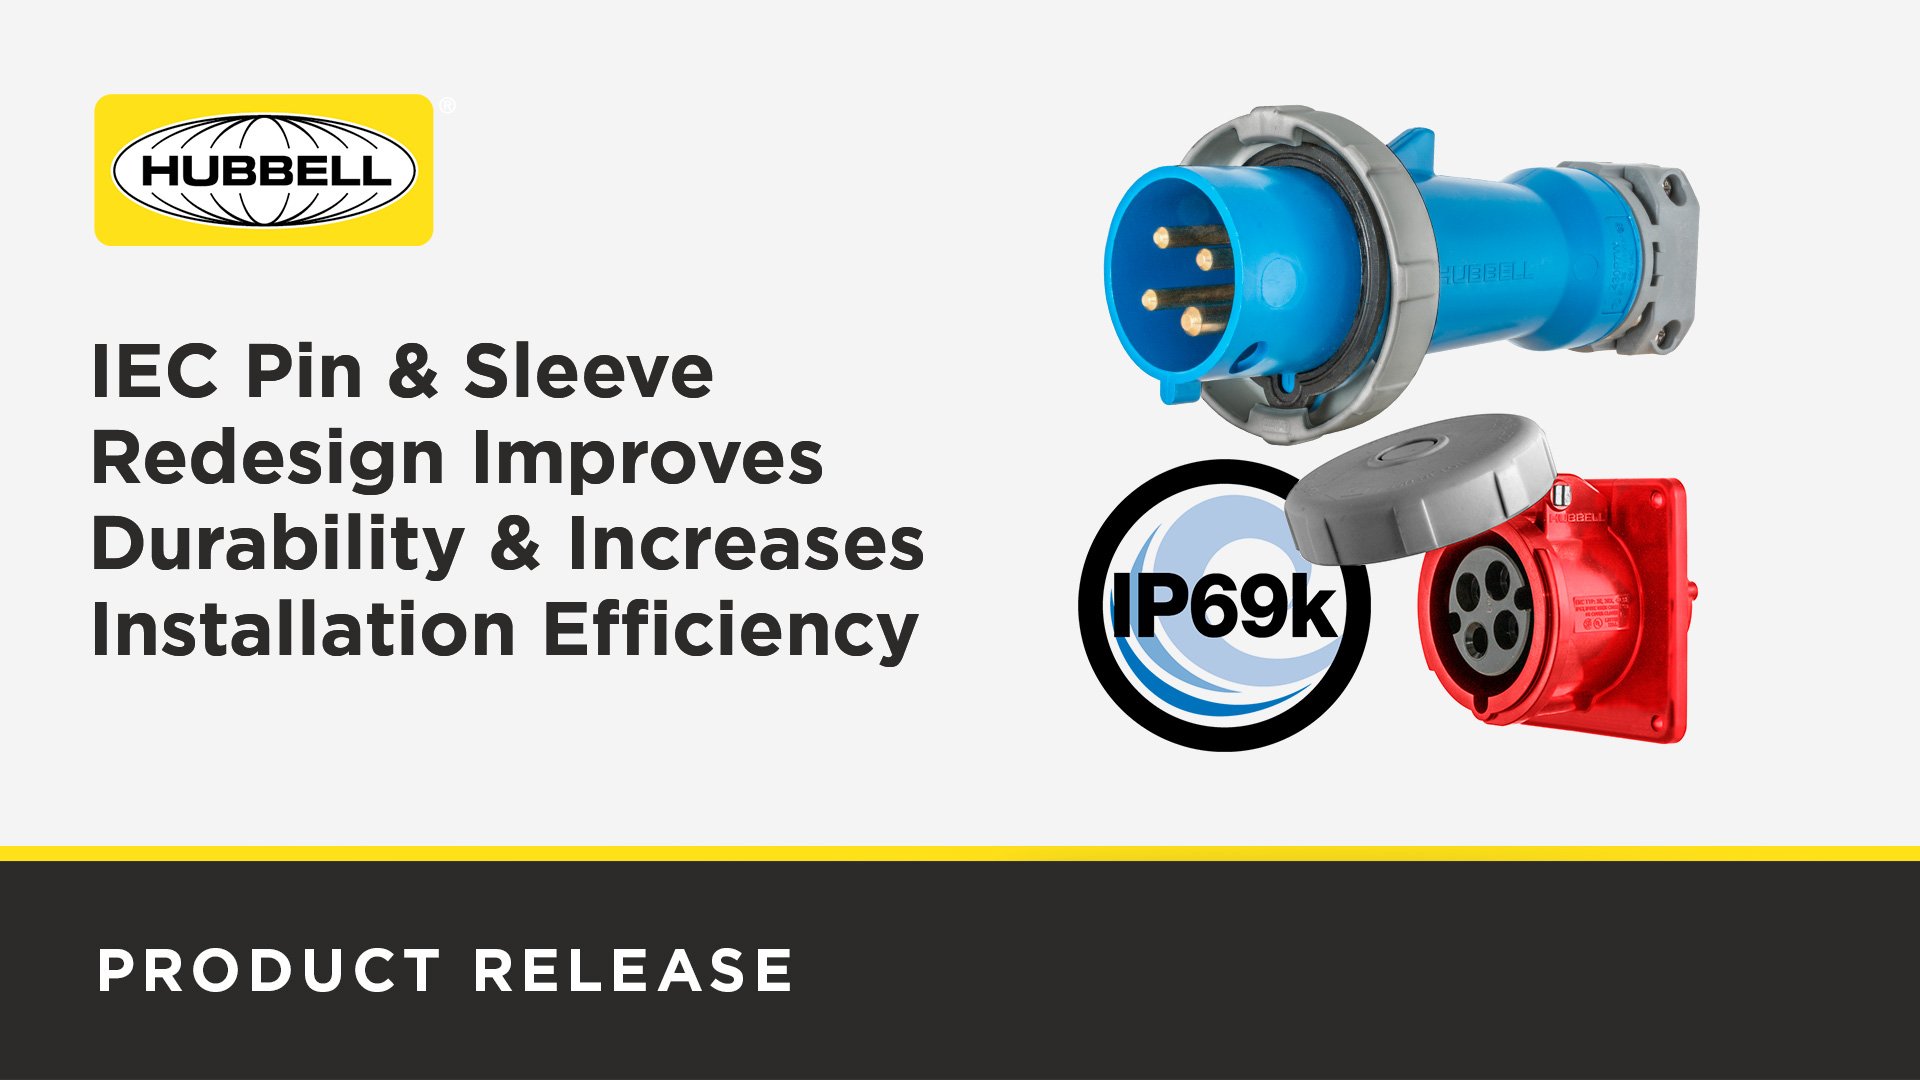 IEC Pin & Sleeve Redesign Improves Durability & Increases Installation Efficiency